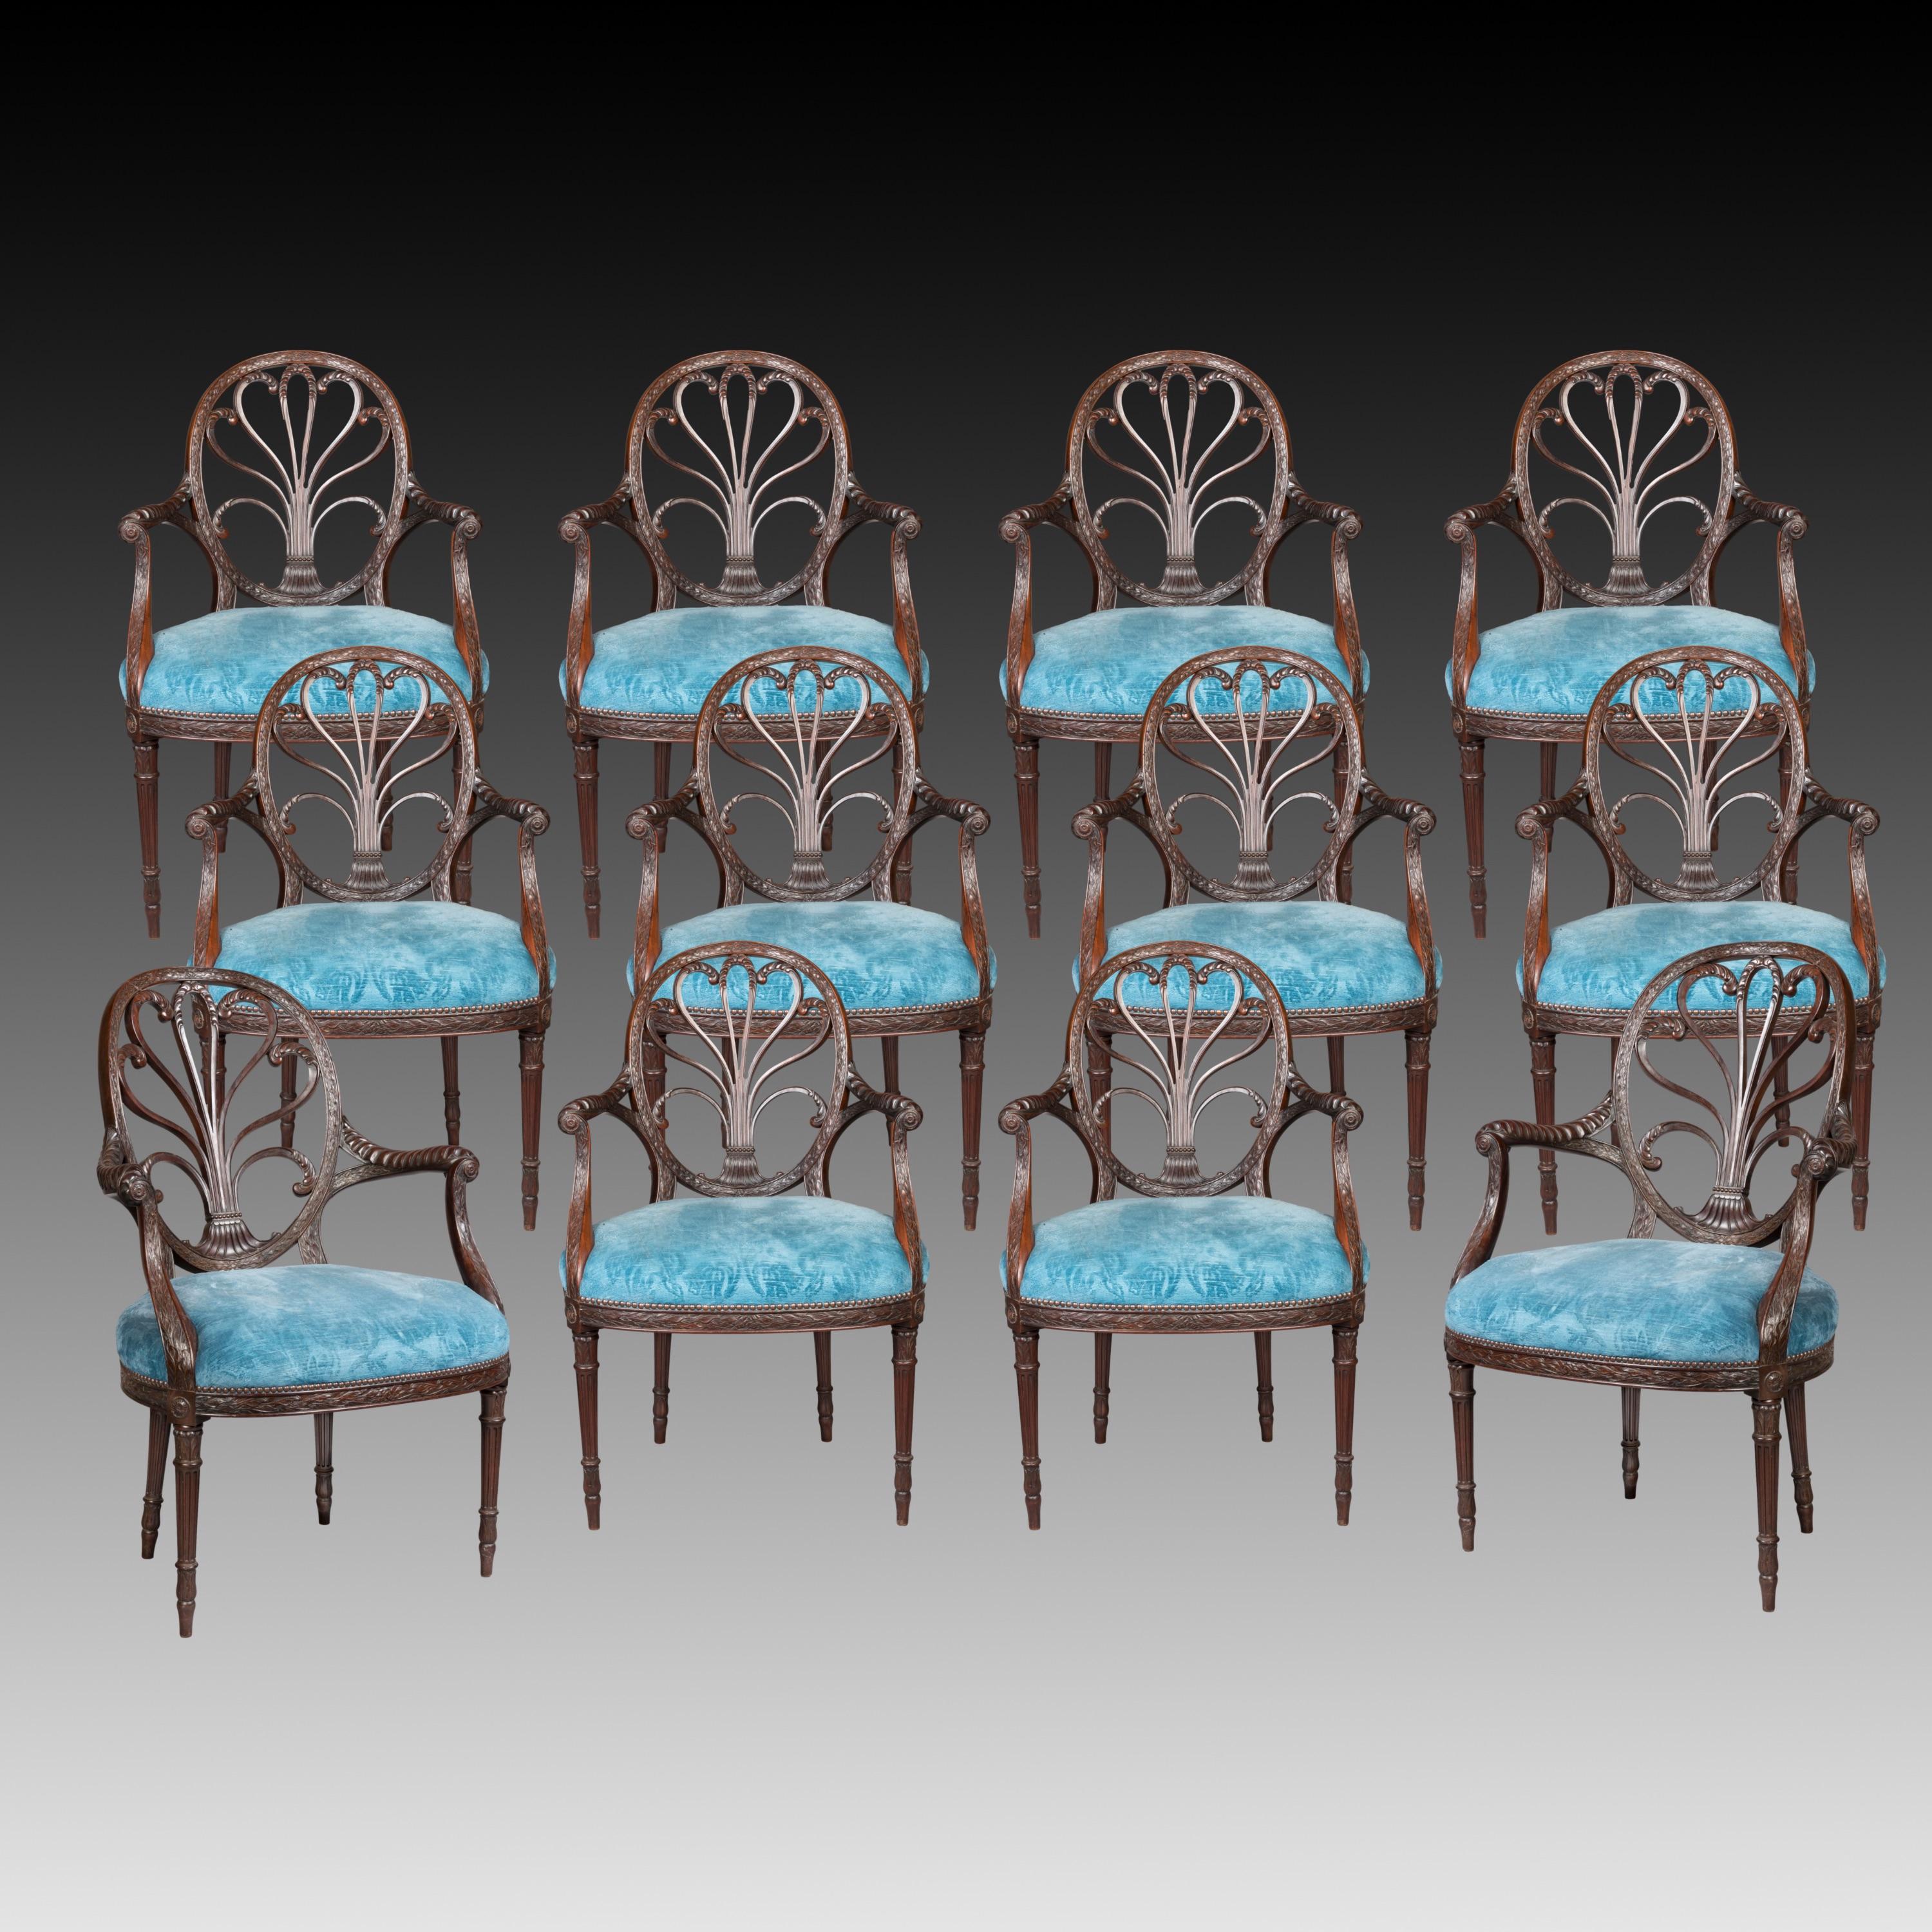 A Superb Set of Twelve Neo-Classical Revival Dining Chairs

A rare set of beautifully drawn proportions with two larger armchairs and ten of smaller scale, all carved from mahogany, rising from tapering and fluted ring turned front legs, with bands